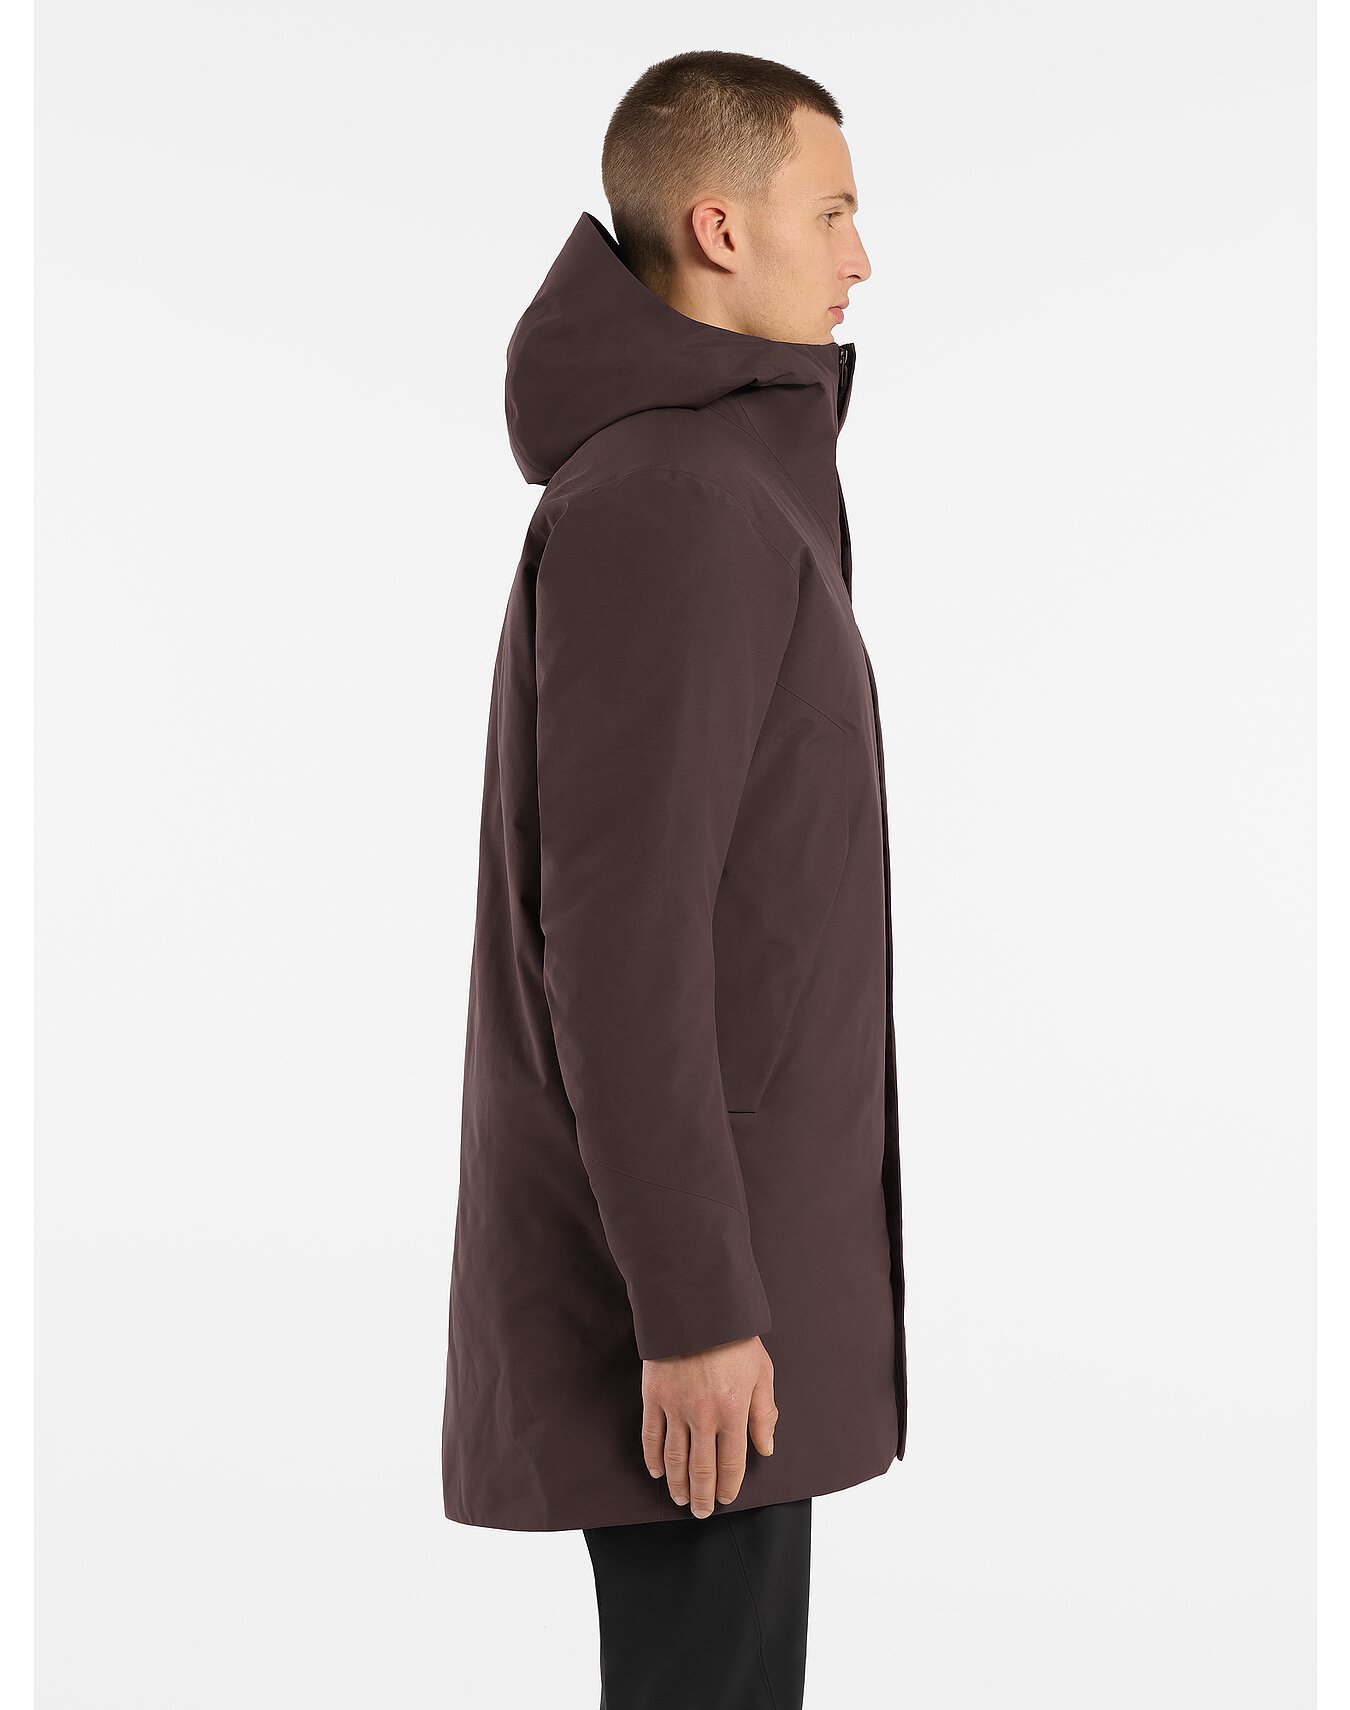 Monitor Down Coat Men's | Arc'teryx Outlet